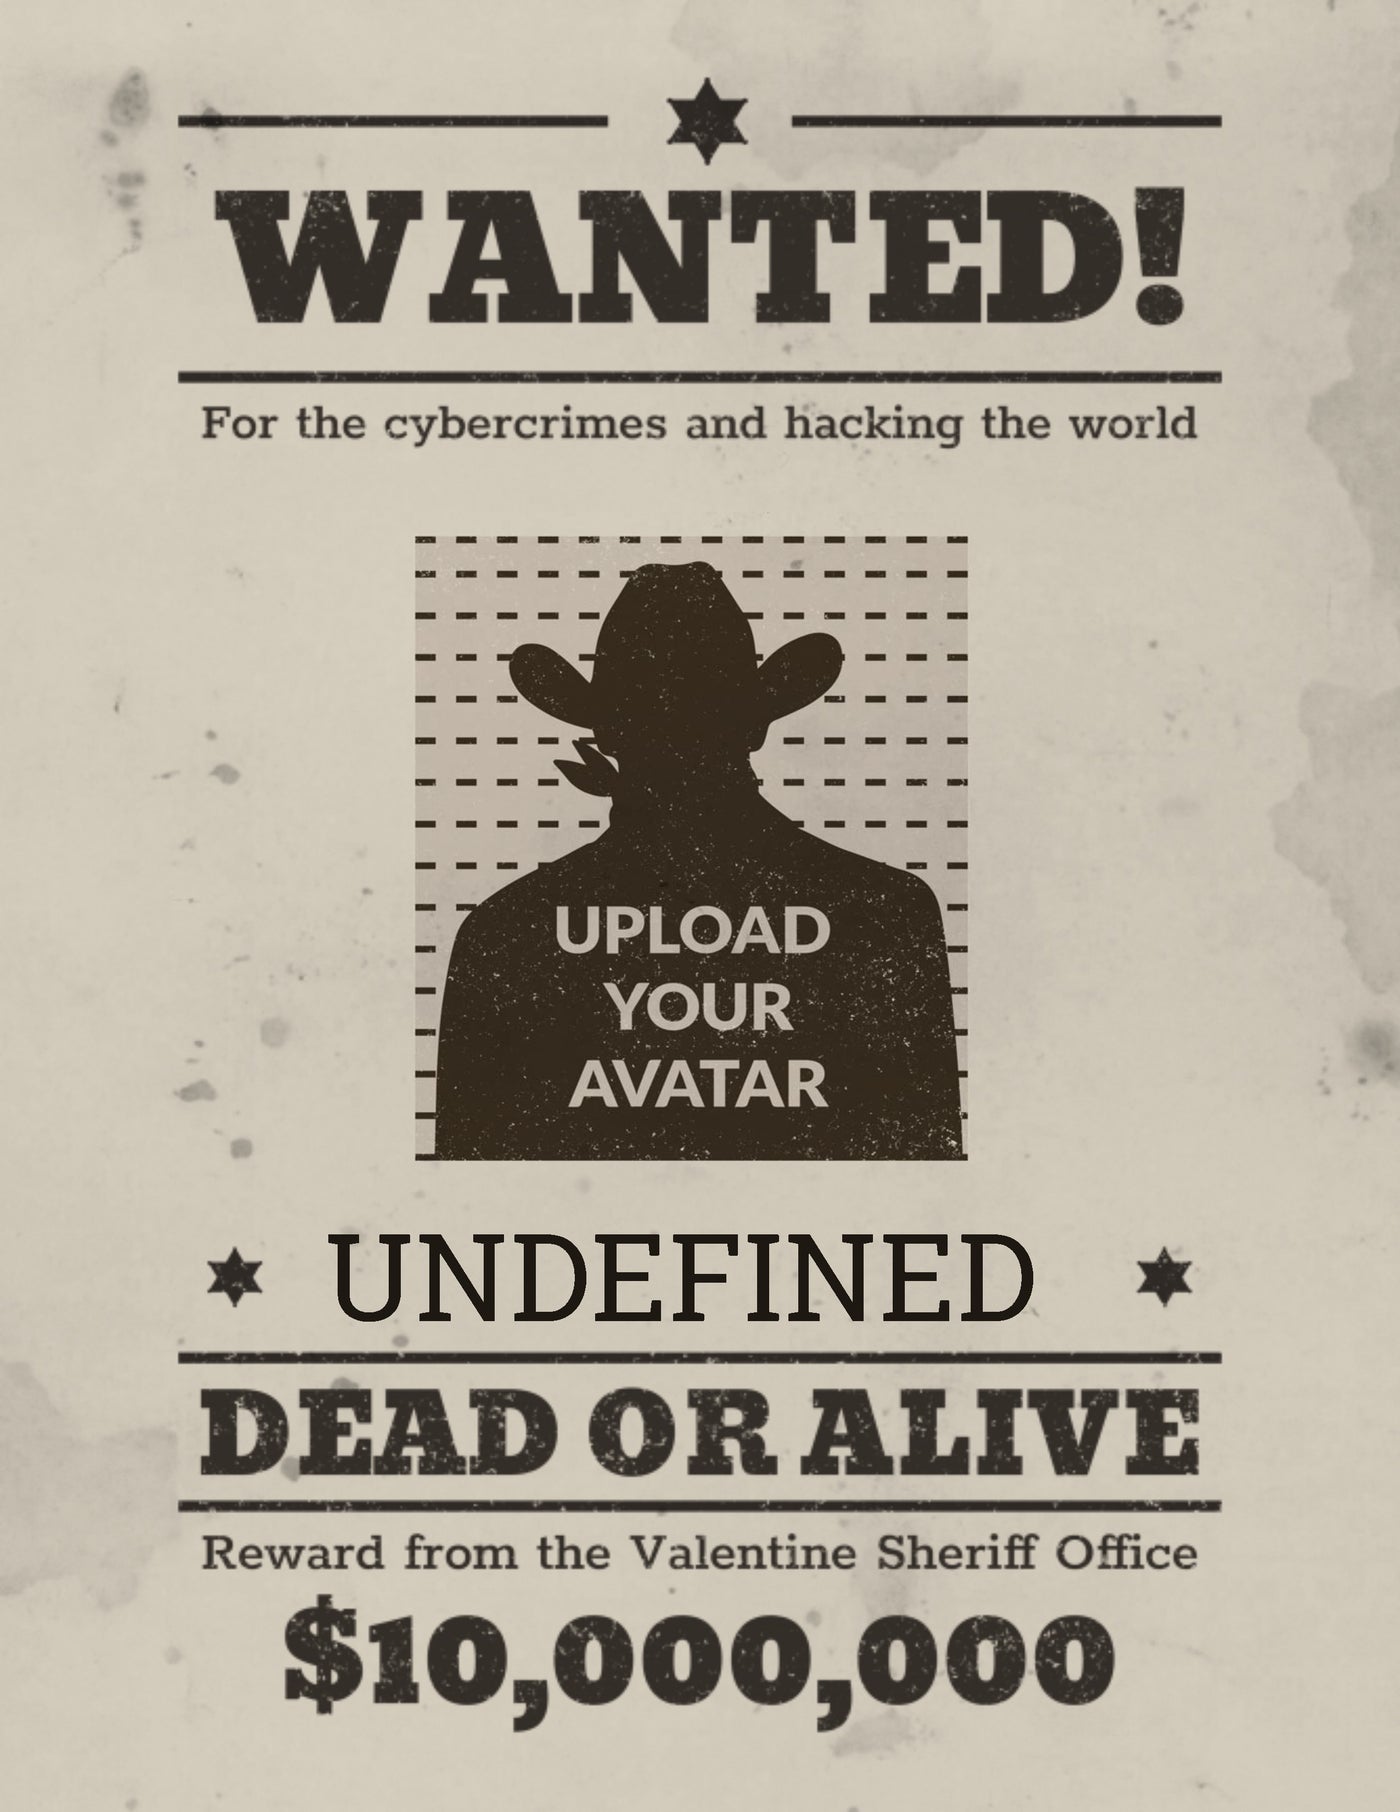 Wanted for the cybercrimes